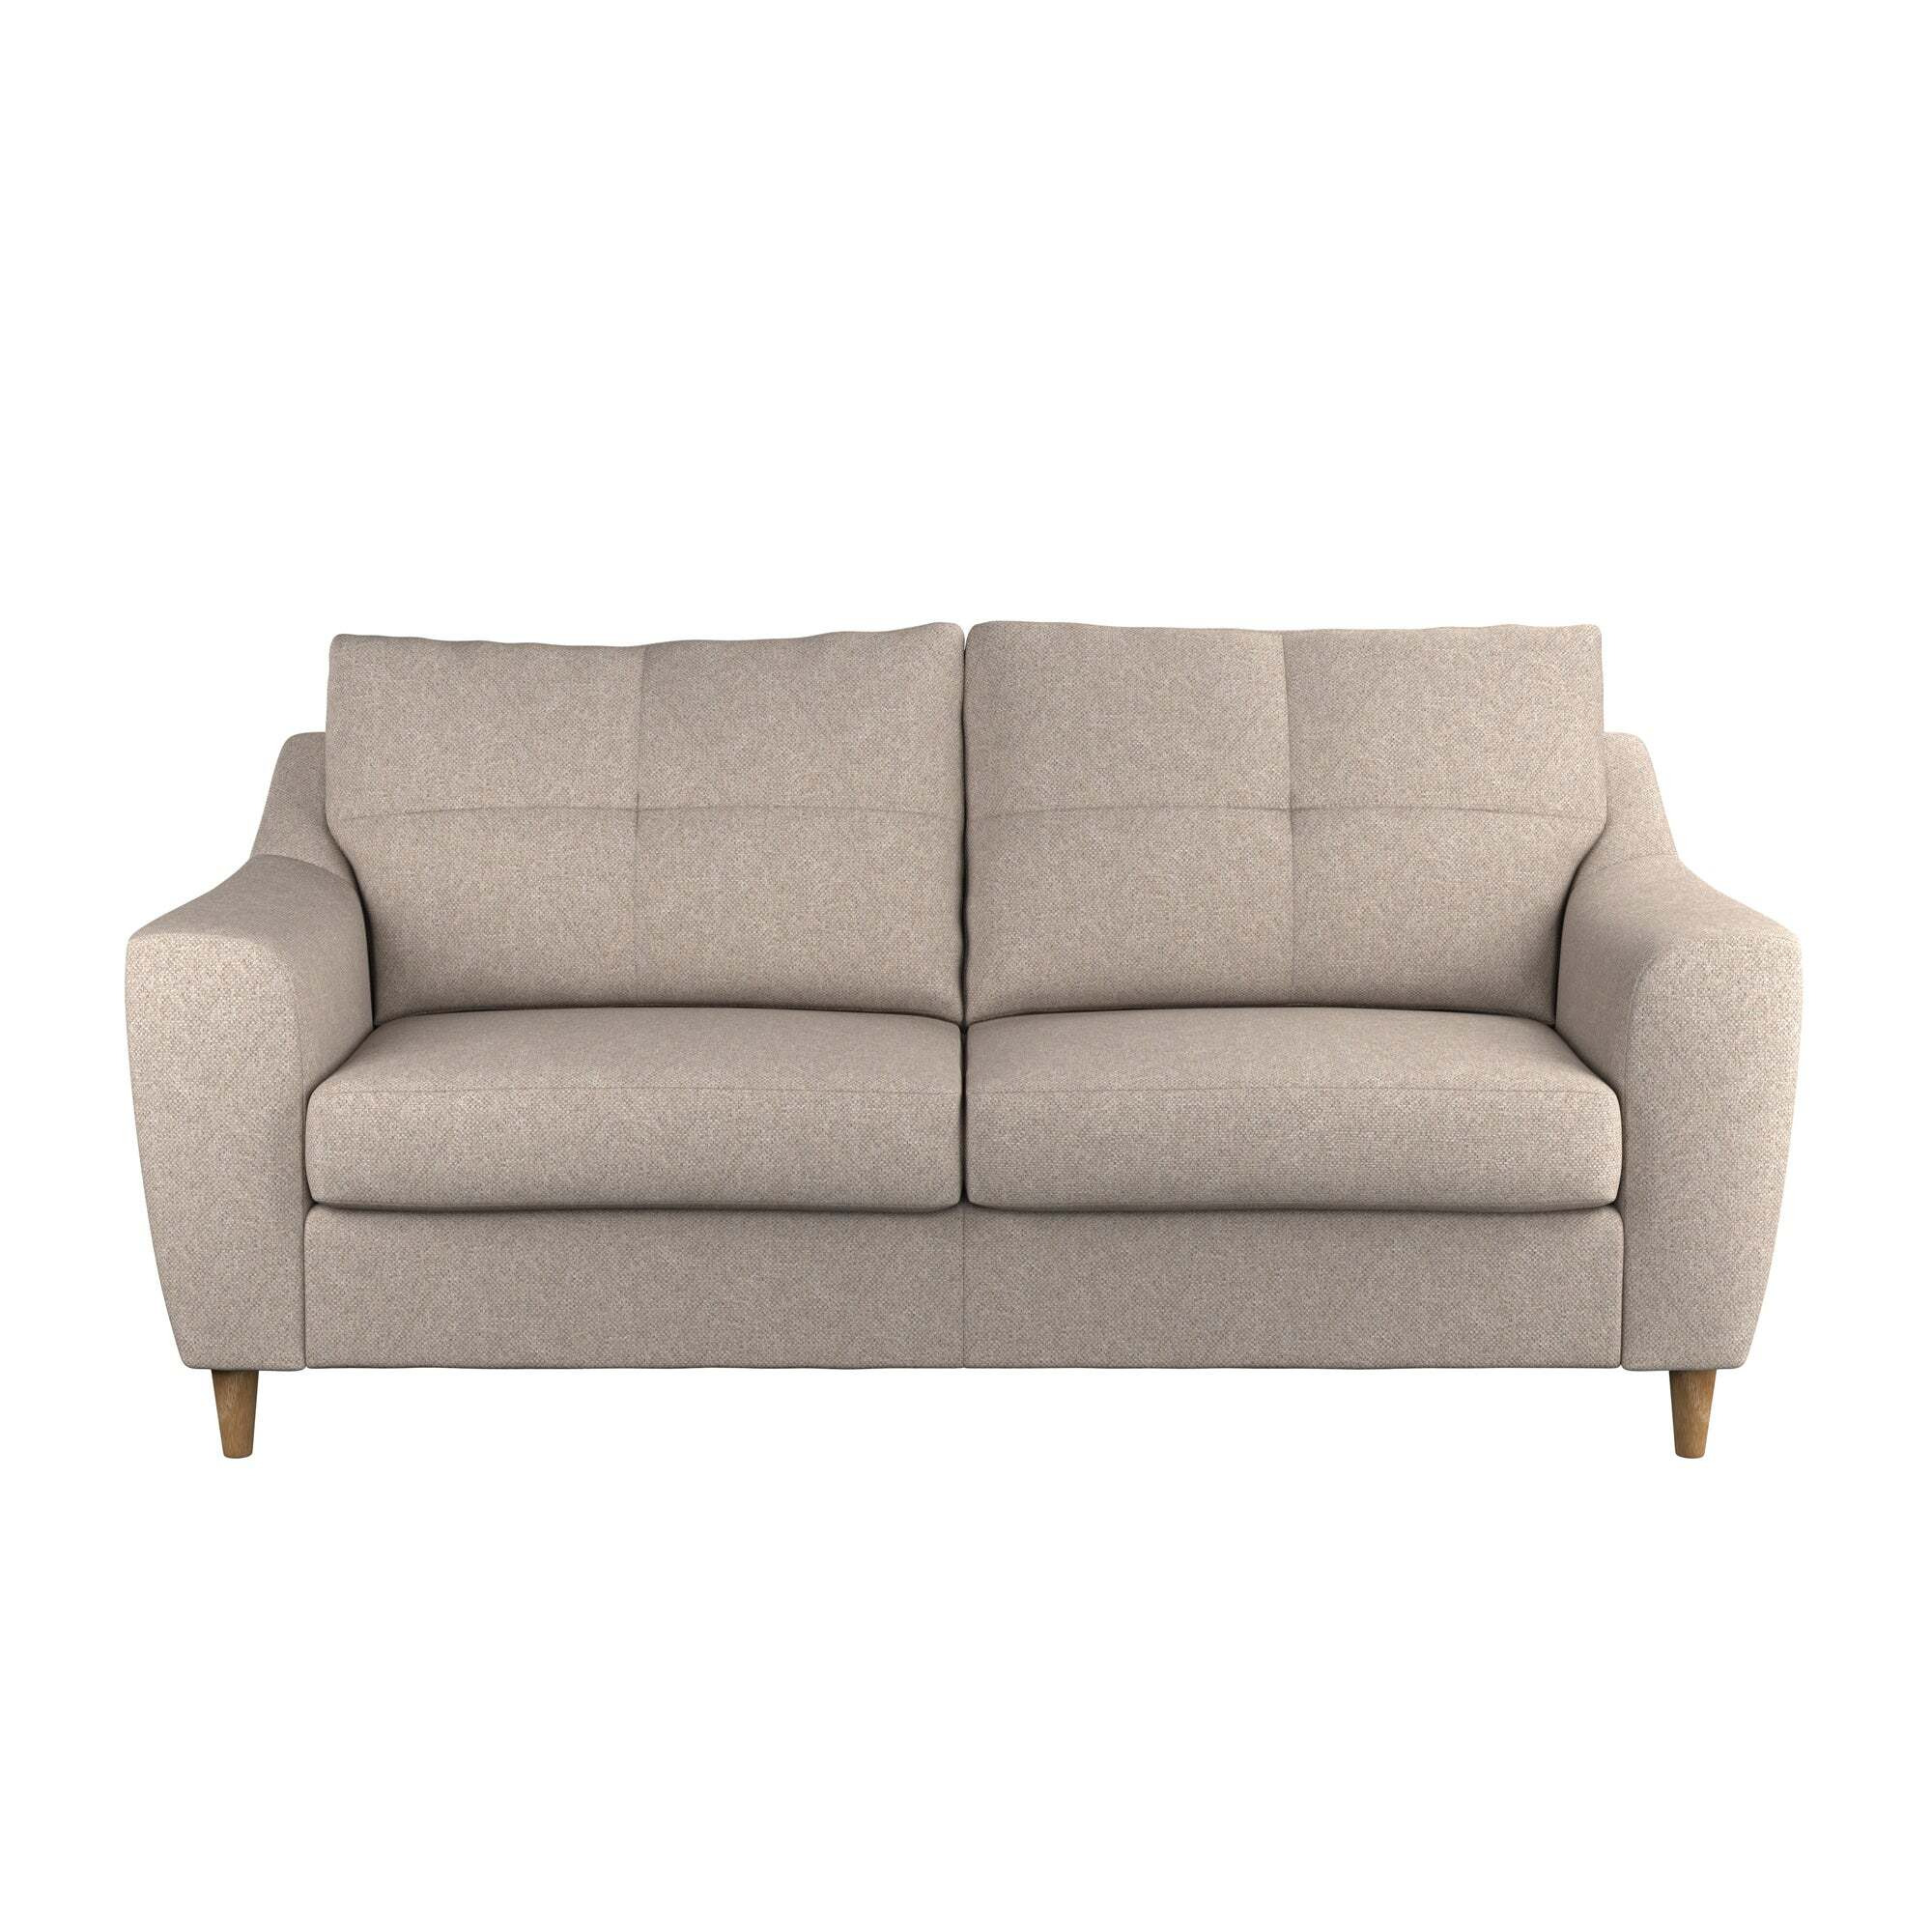 Baxter Textured Weave 3 Seater Sofa Brown